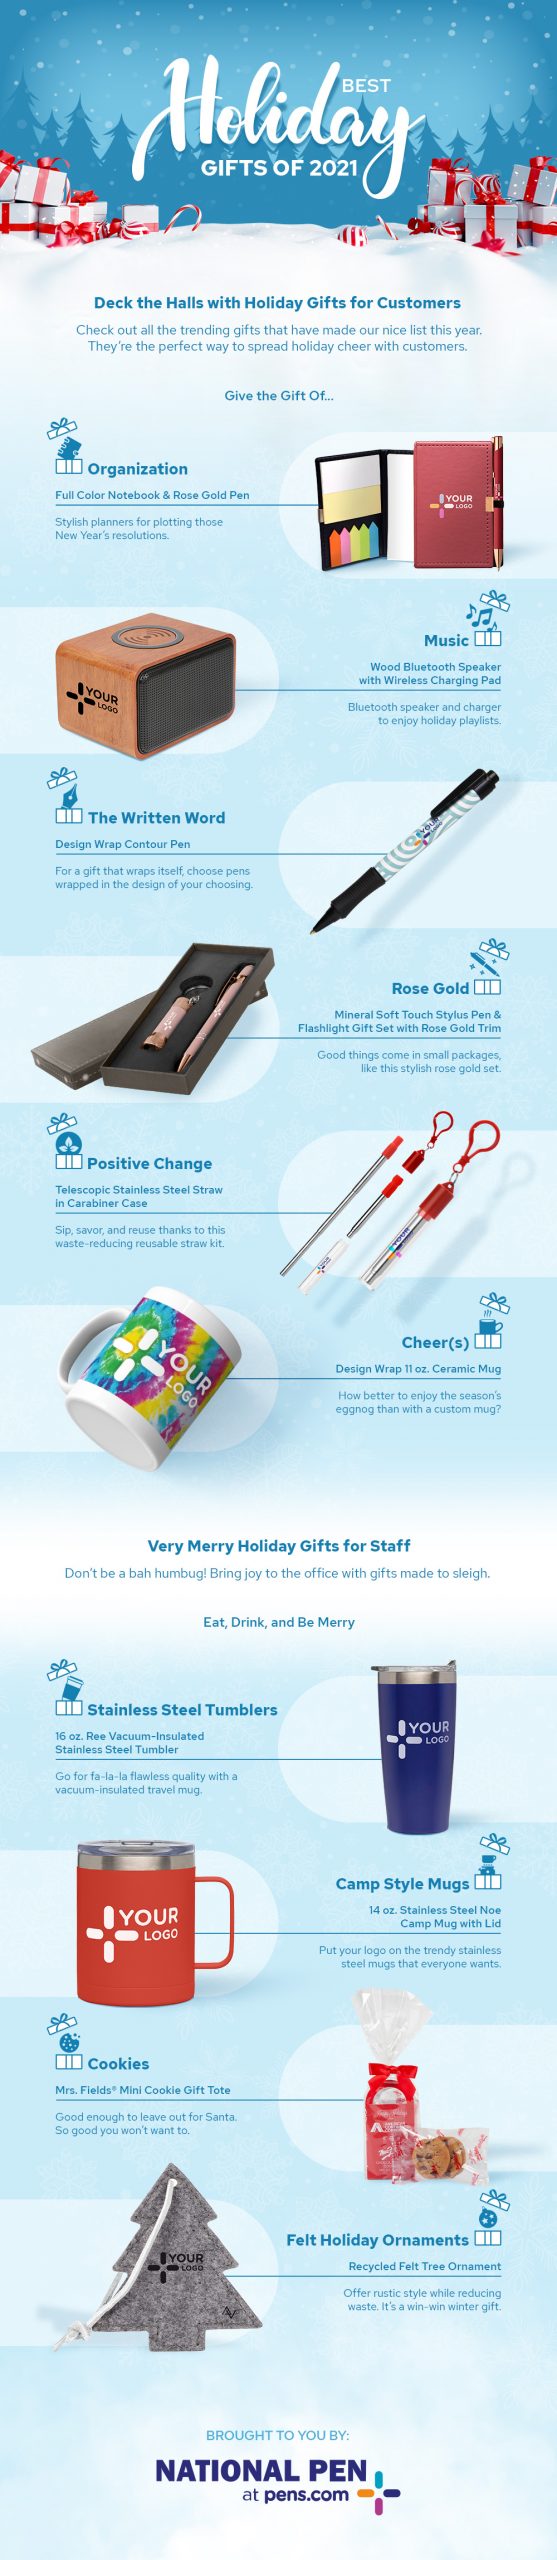 https://www.pens.com/blog/wp-content/uploads/2021/10/Holiday-Gift-Guide_Inforgraphic_03-2-scaled.jpg